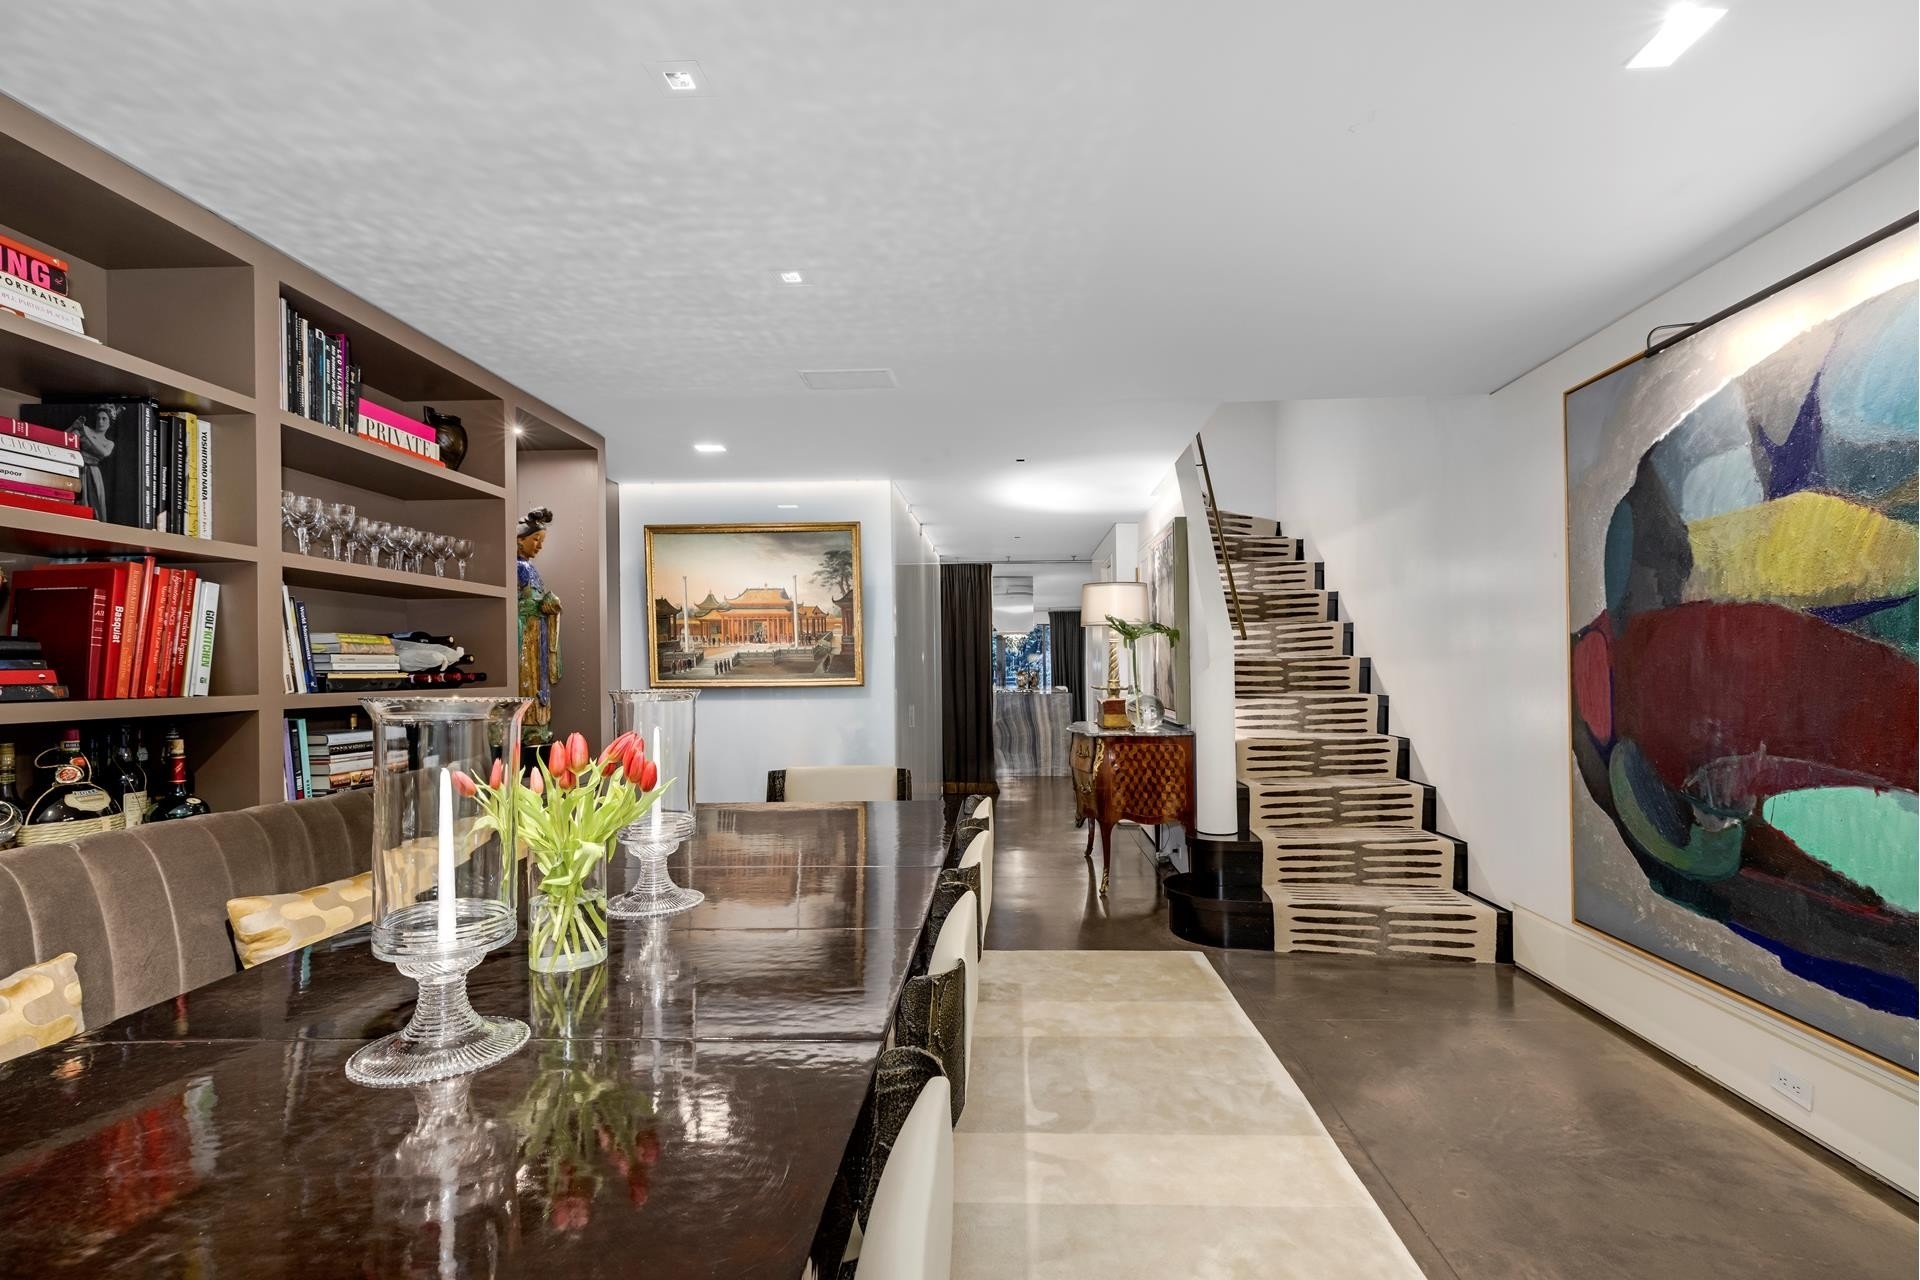 2. Single Family Townhouse for Sale at 160 E 63RD ST, TOWNHOUSE Lenox Hill, New York, NY 10065